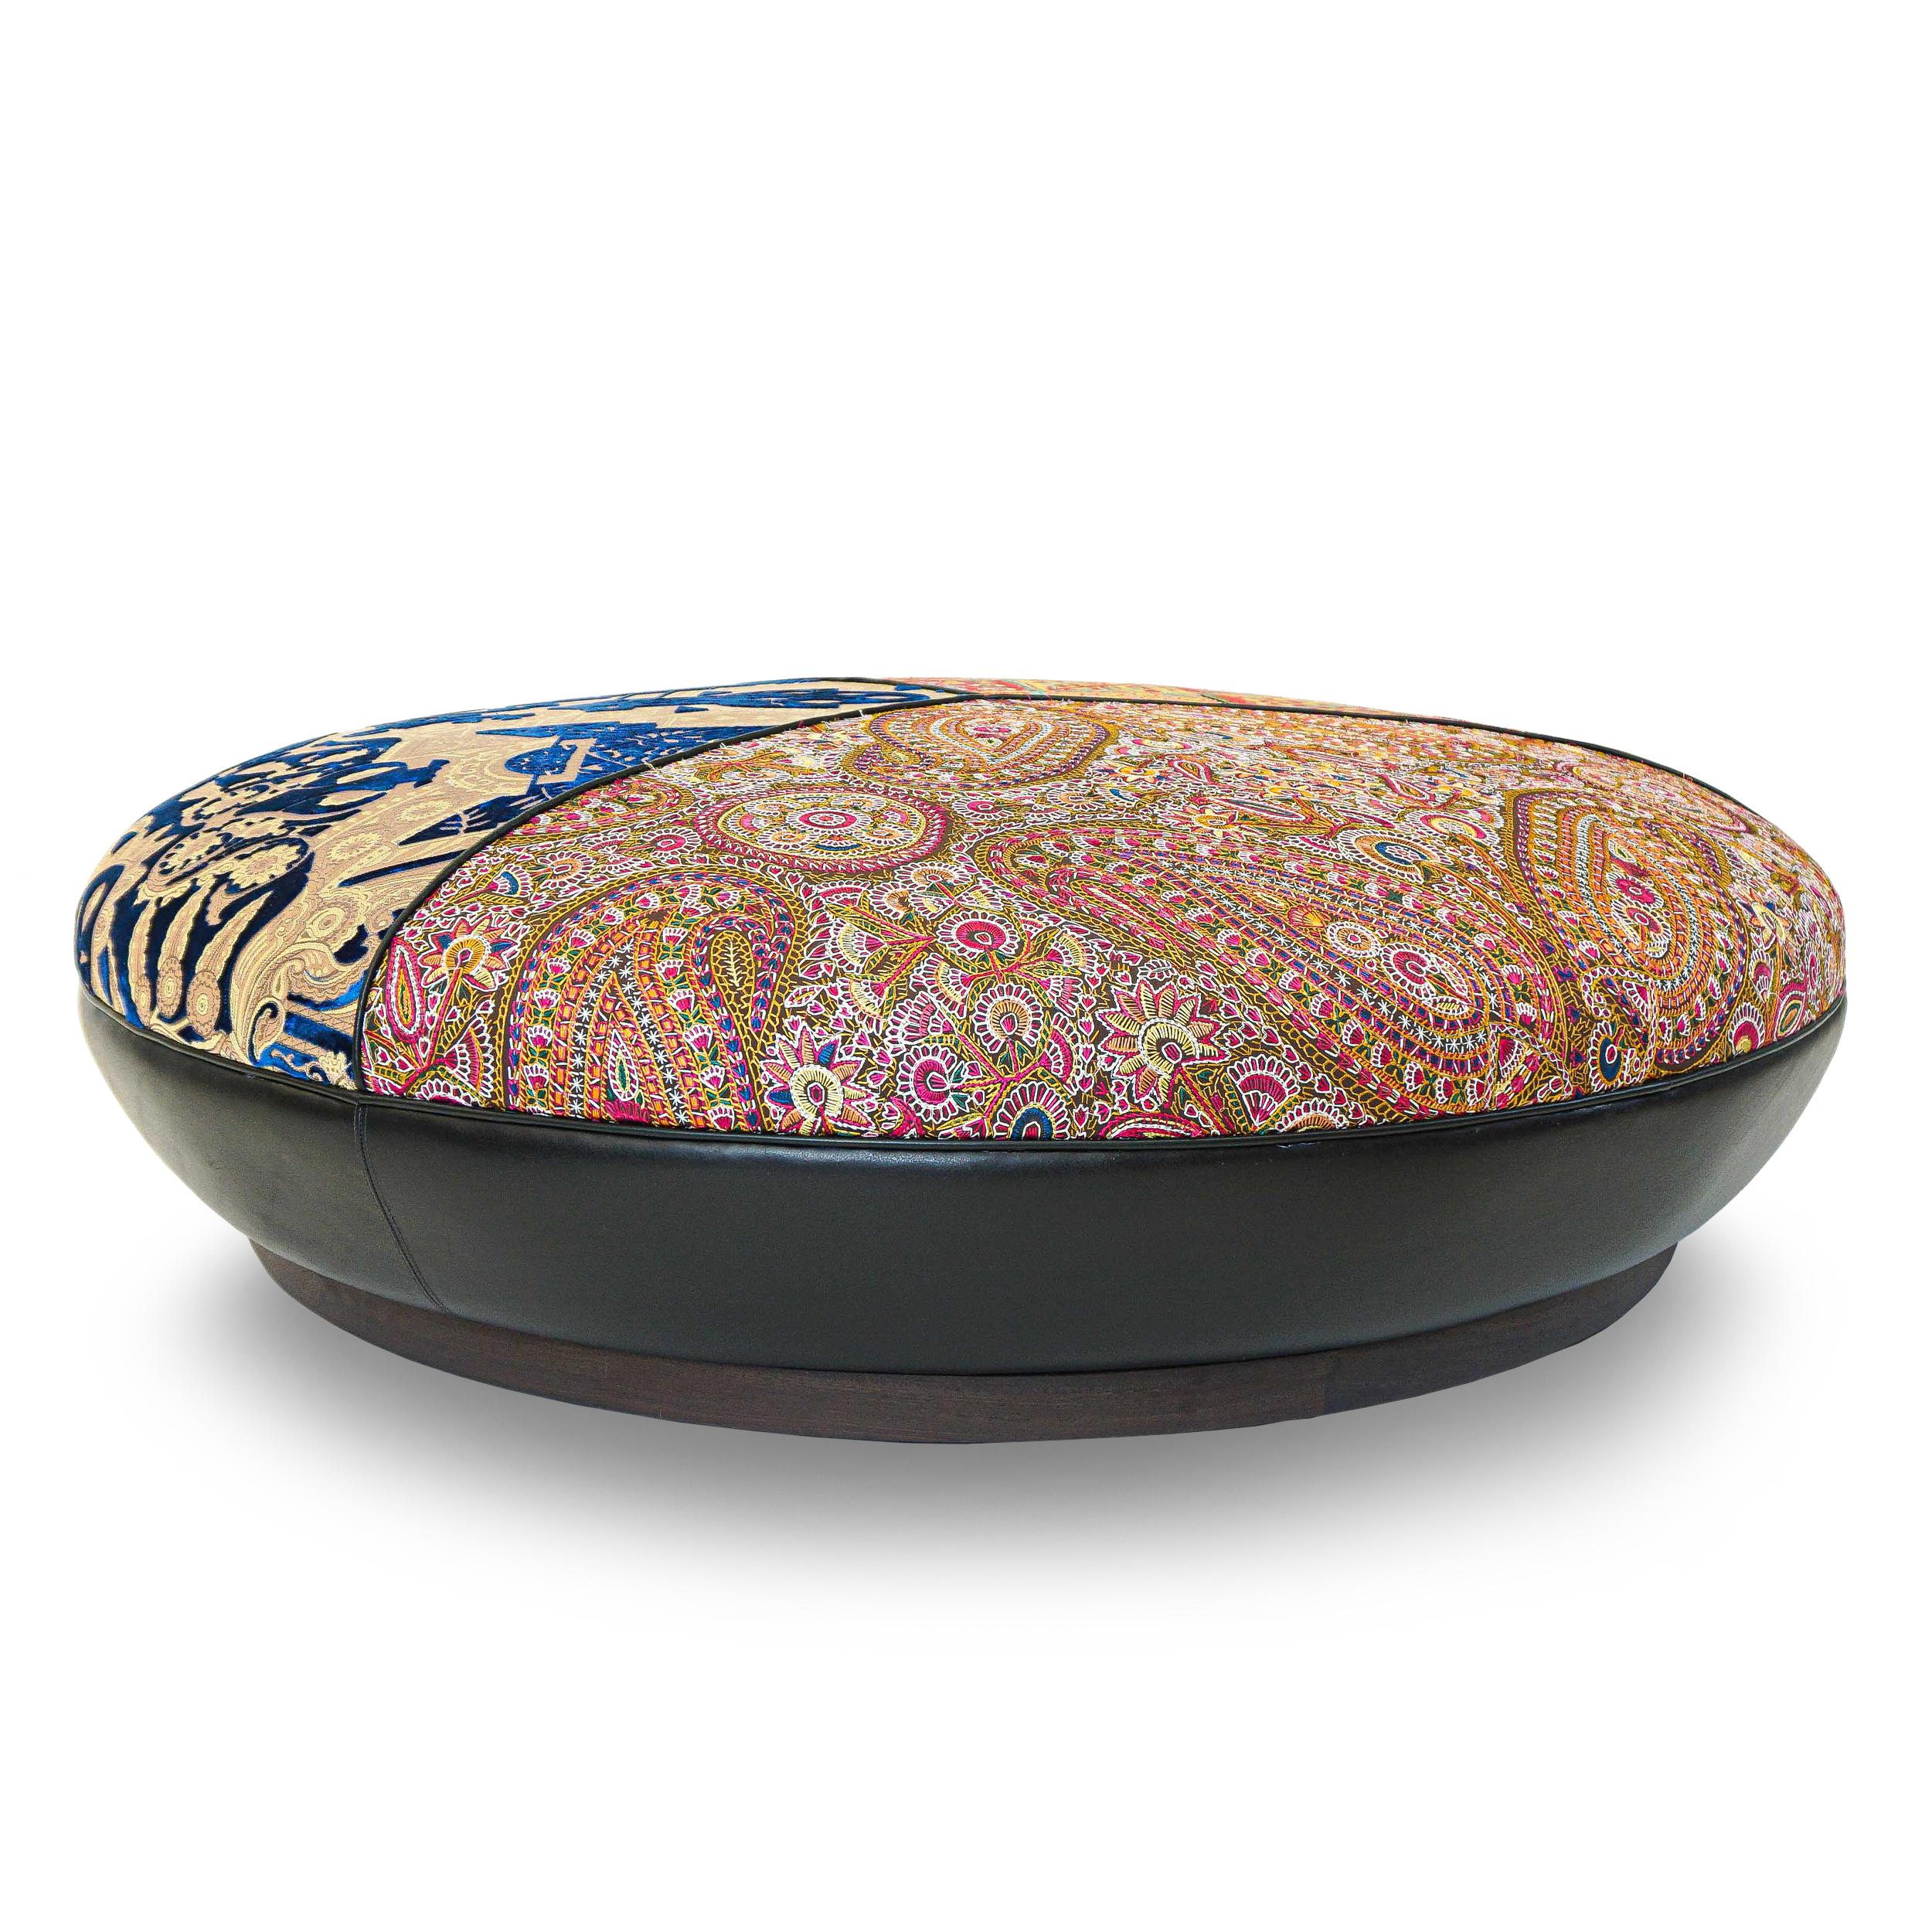 Large Round Upholstered Moroccan-Inspired Ottoman, Customizable For Sale 5